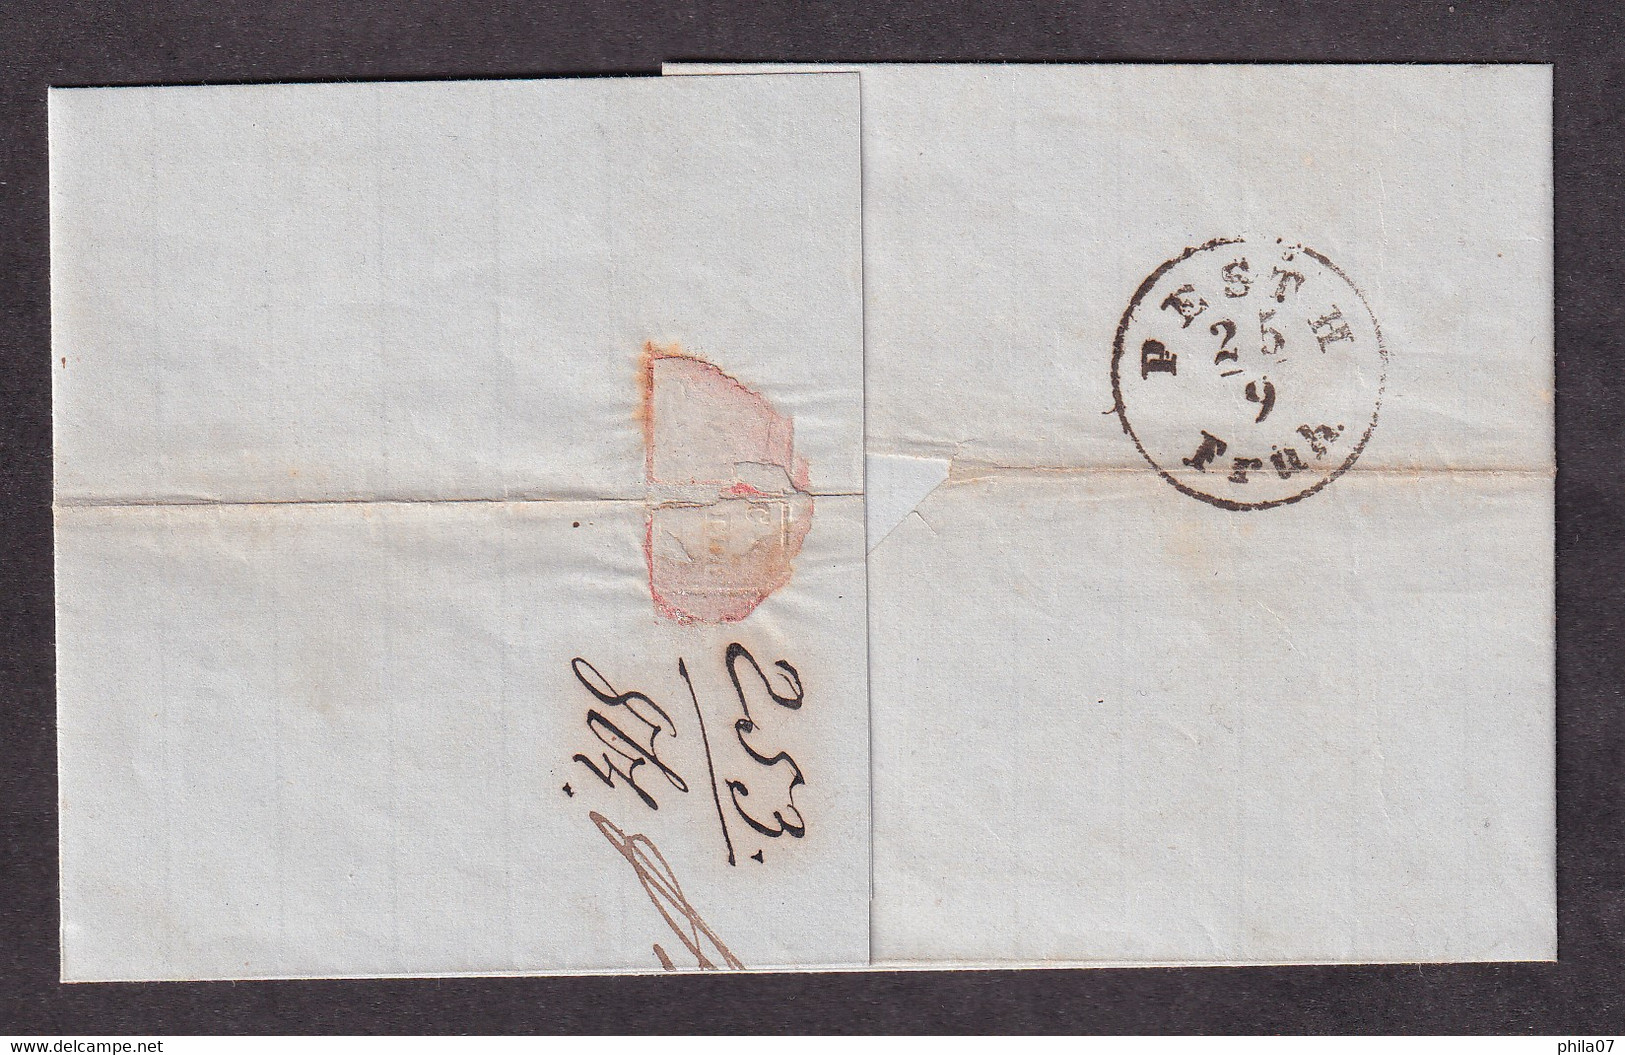 AUSTRIA - Letter Sent To Pesch. Nice Stamp And Arrival Cancel On The Back. Letter Without Content - 3 Scans - Covers & Documents